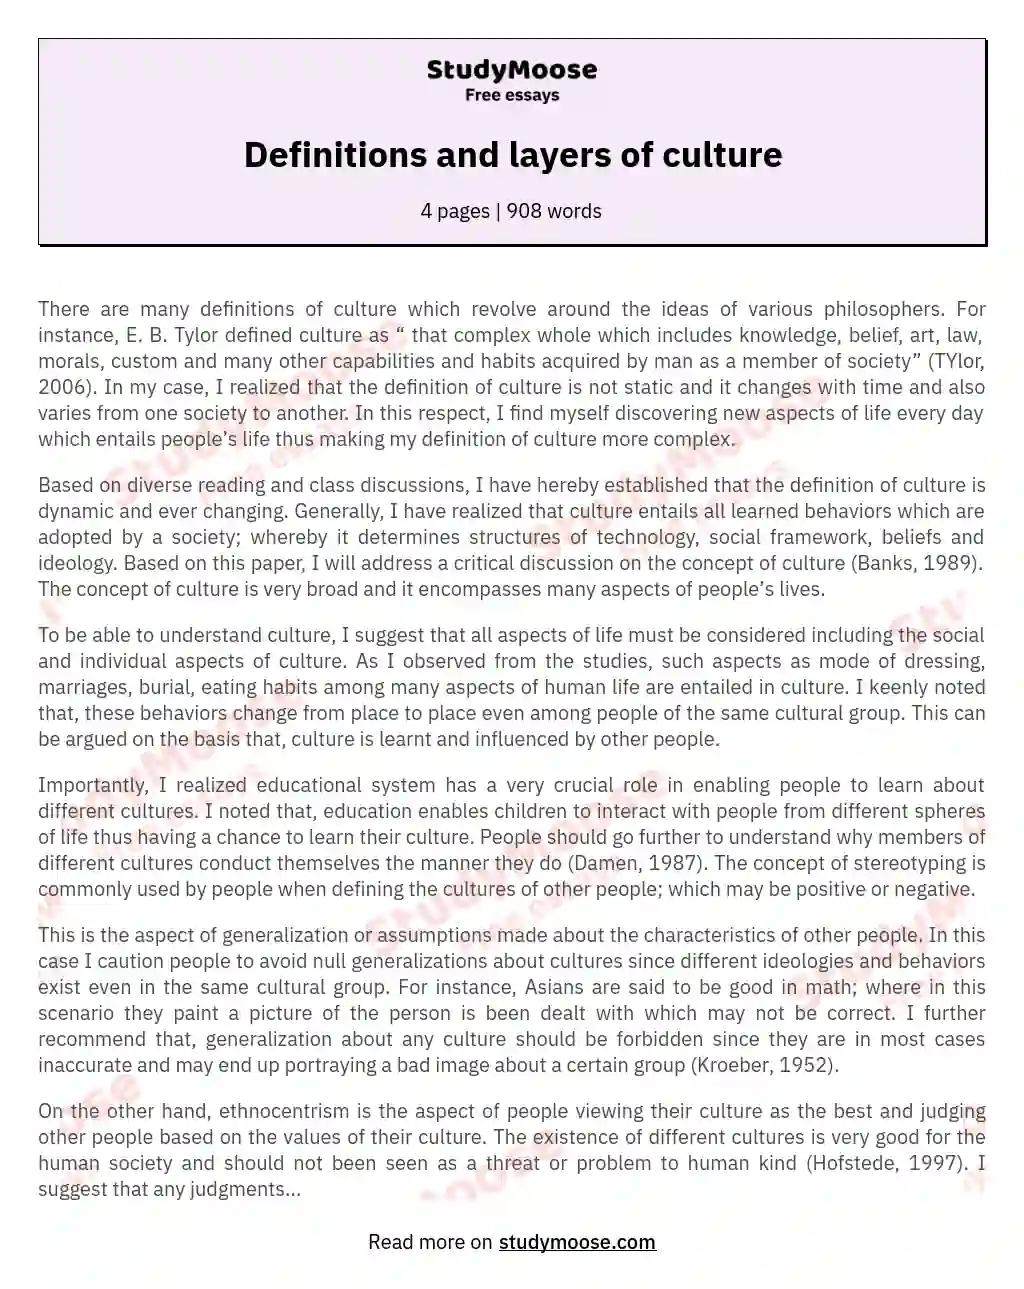 Definitions and layers of culture essay